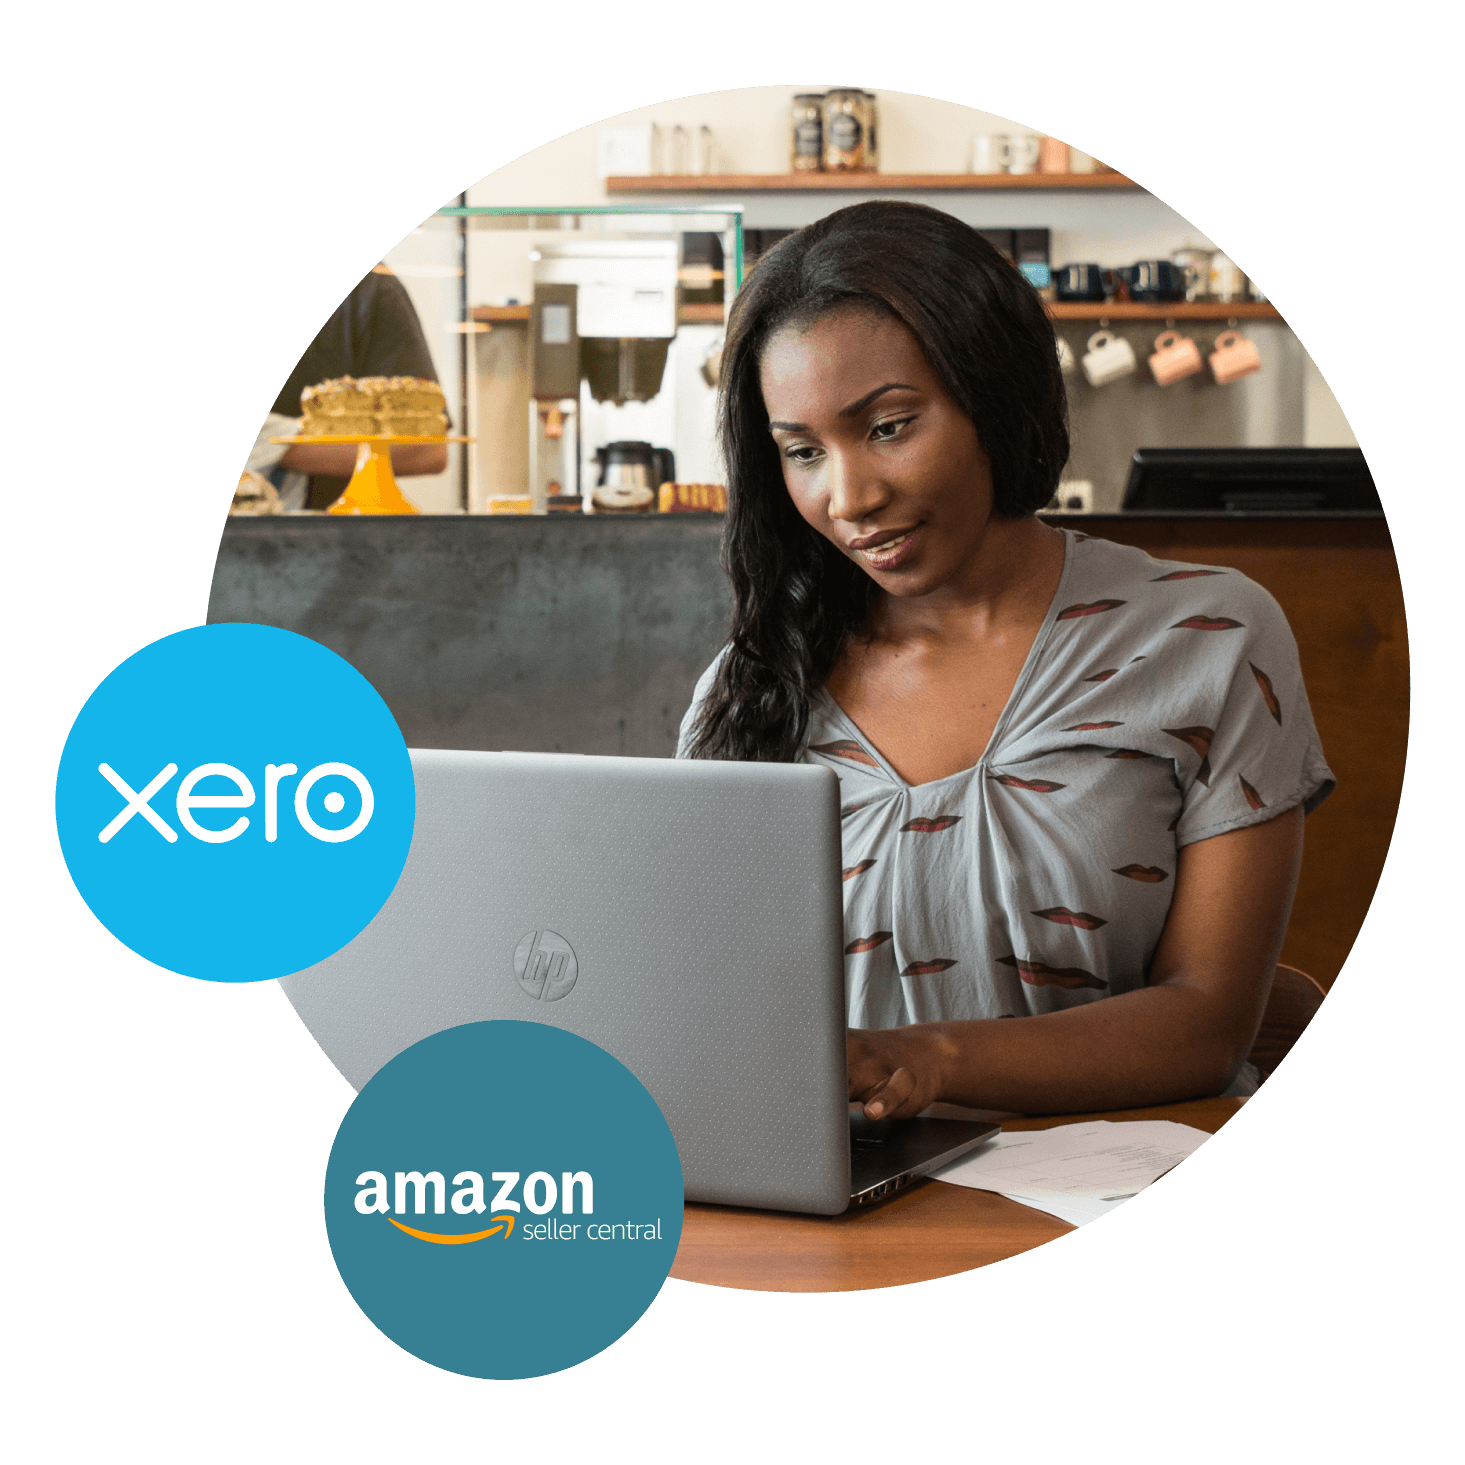 An Amazon seller uses Xero’s analytics tools on their laptop to view projected cash flow up to 90 days ahead. 